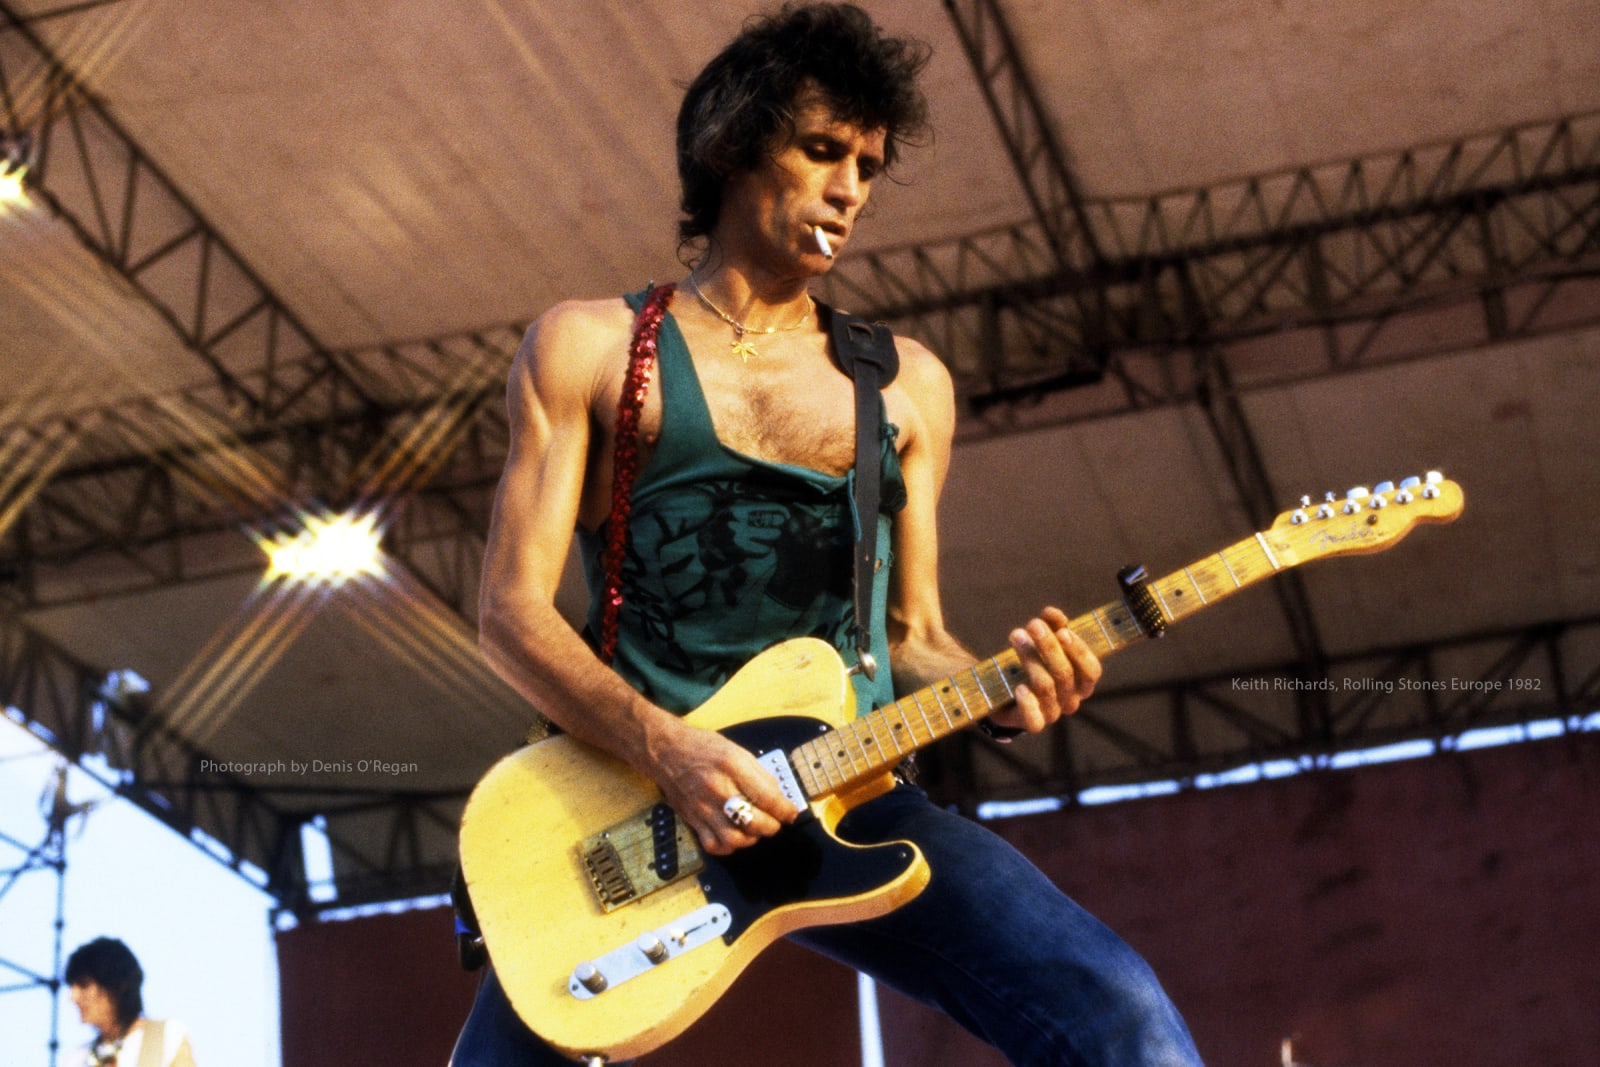 ROLLING STONES, Keith Richards live, 1982